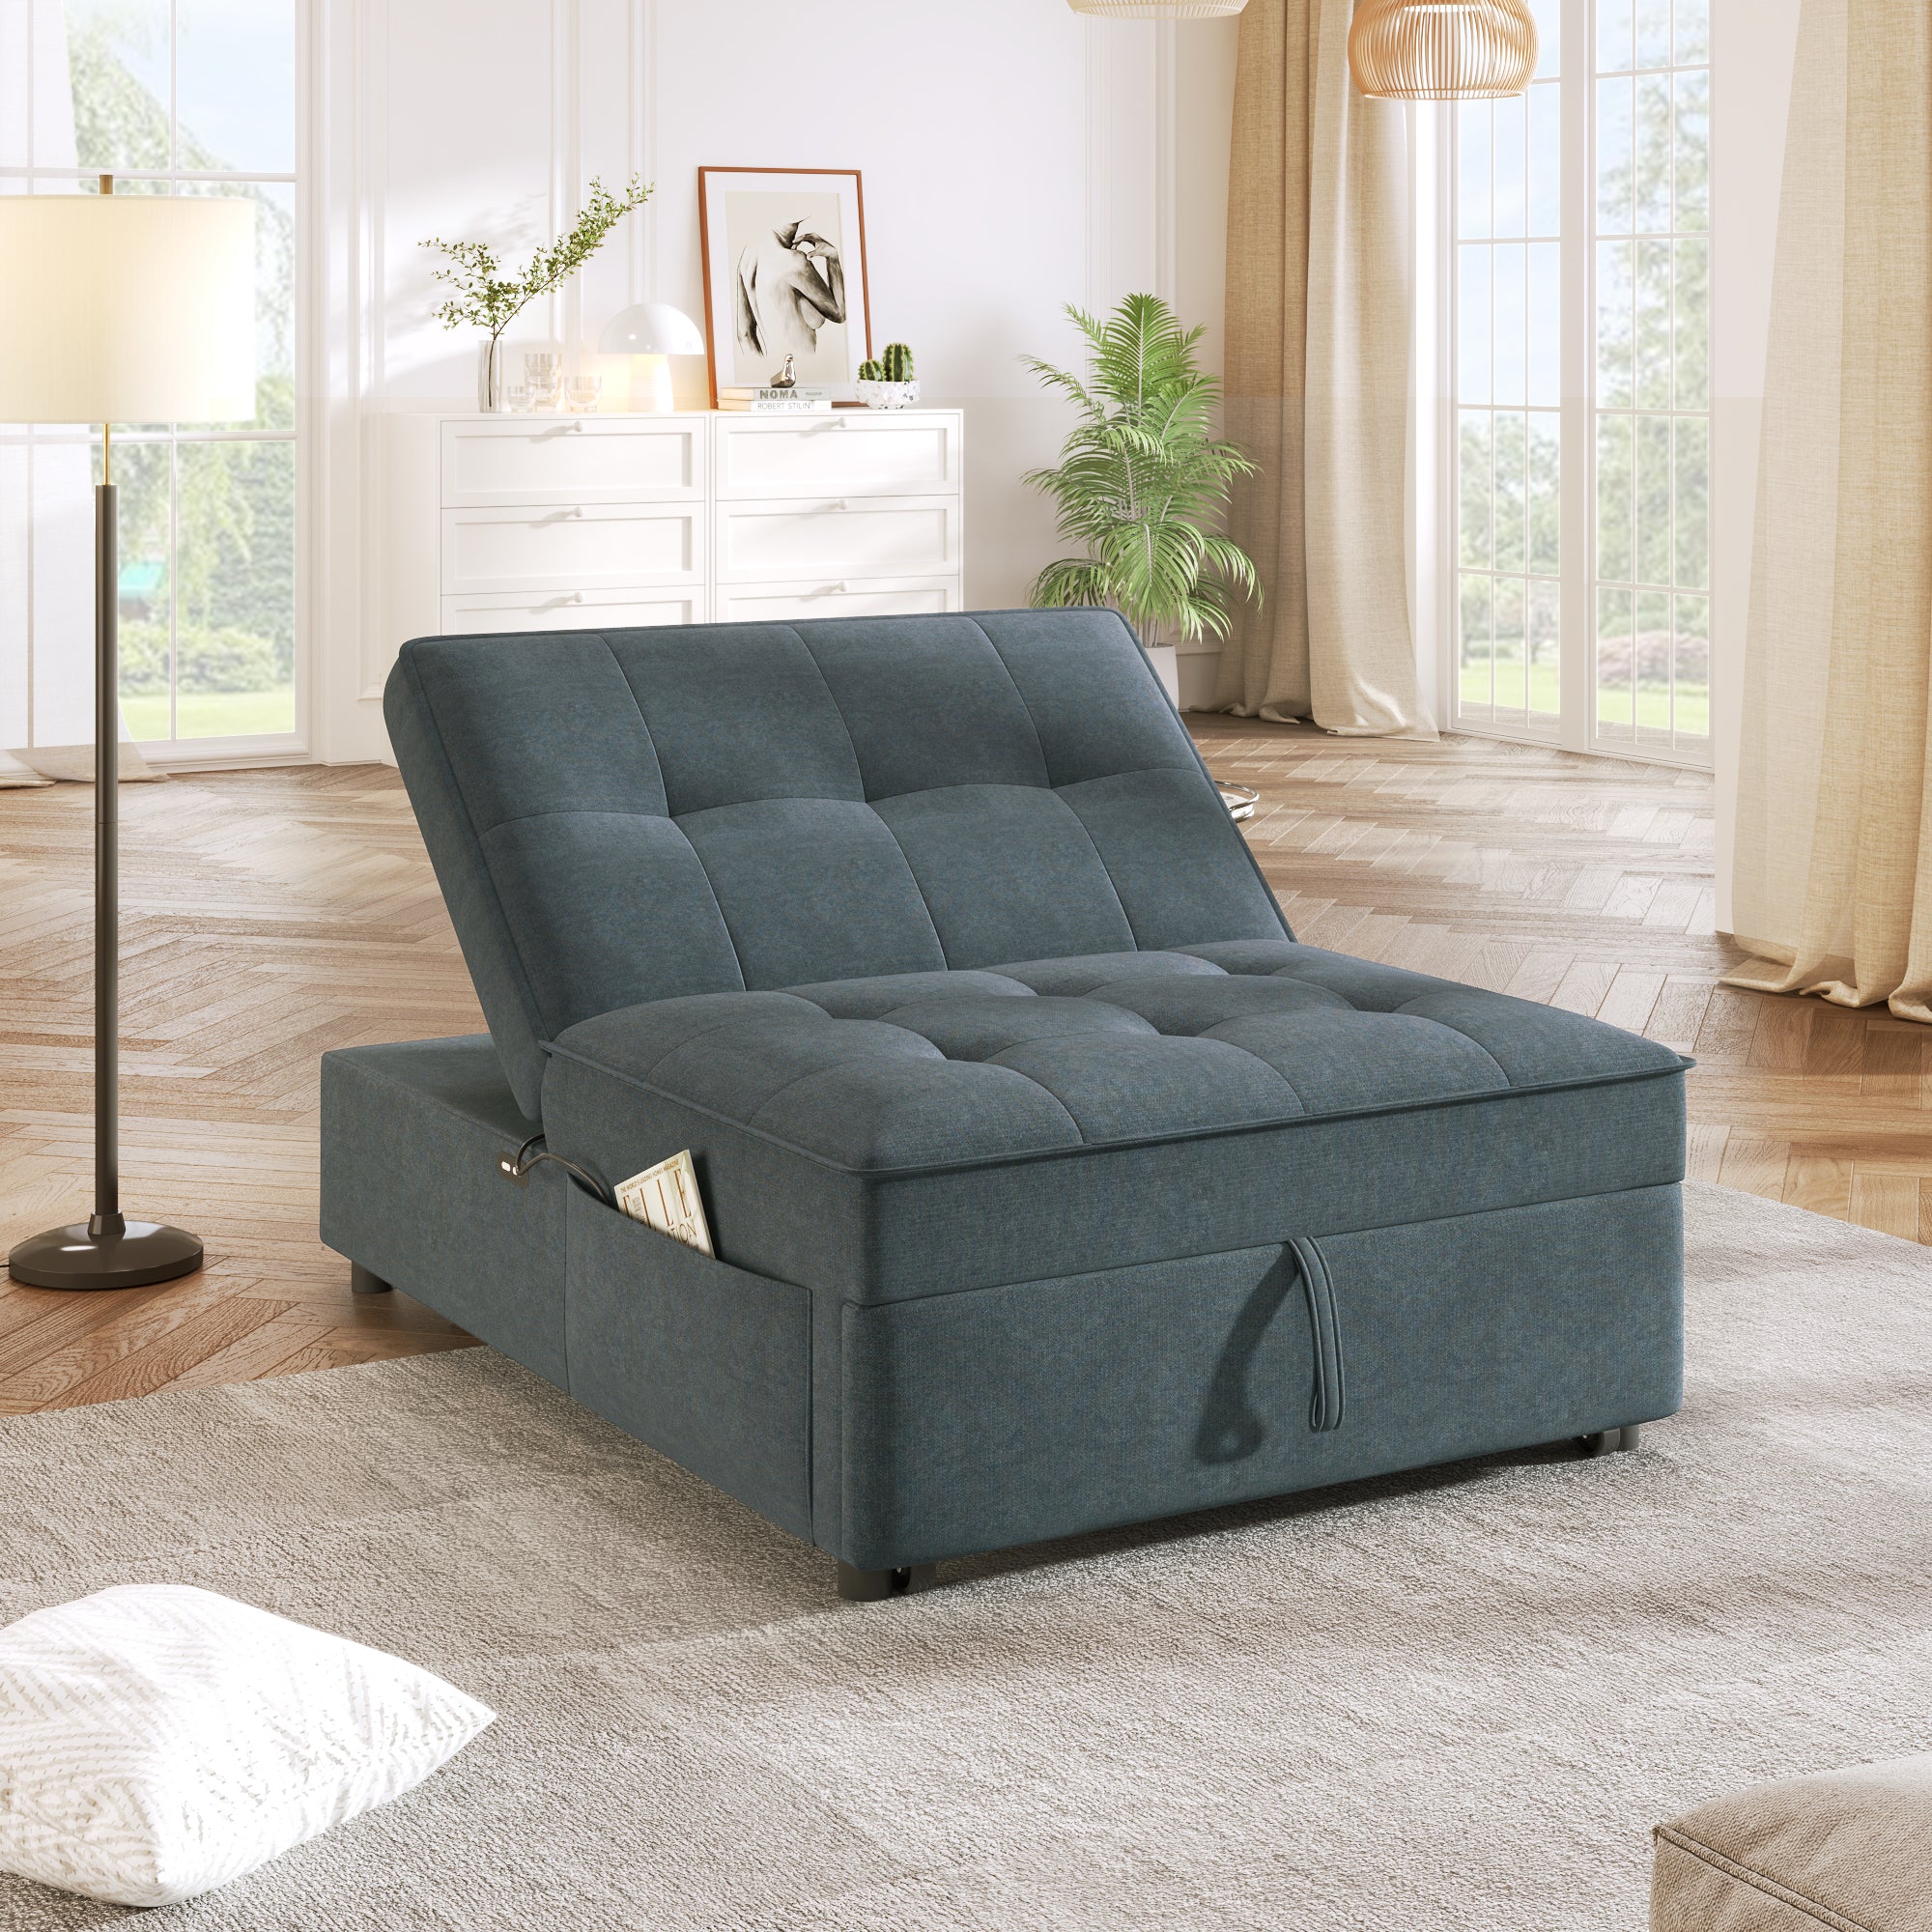 4 in 1 Sofa Bed, Chair Bed, Multi Function Folding dark blue-primary living space-linen